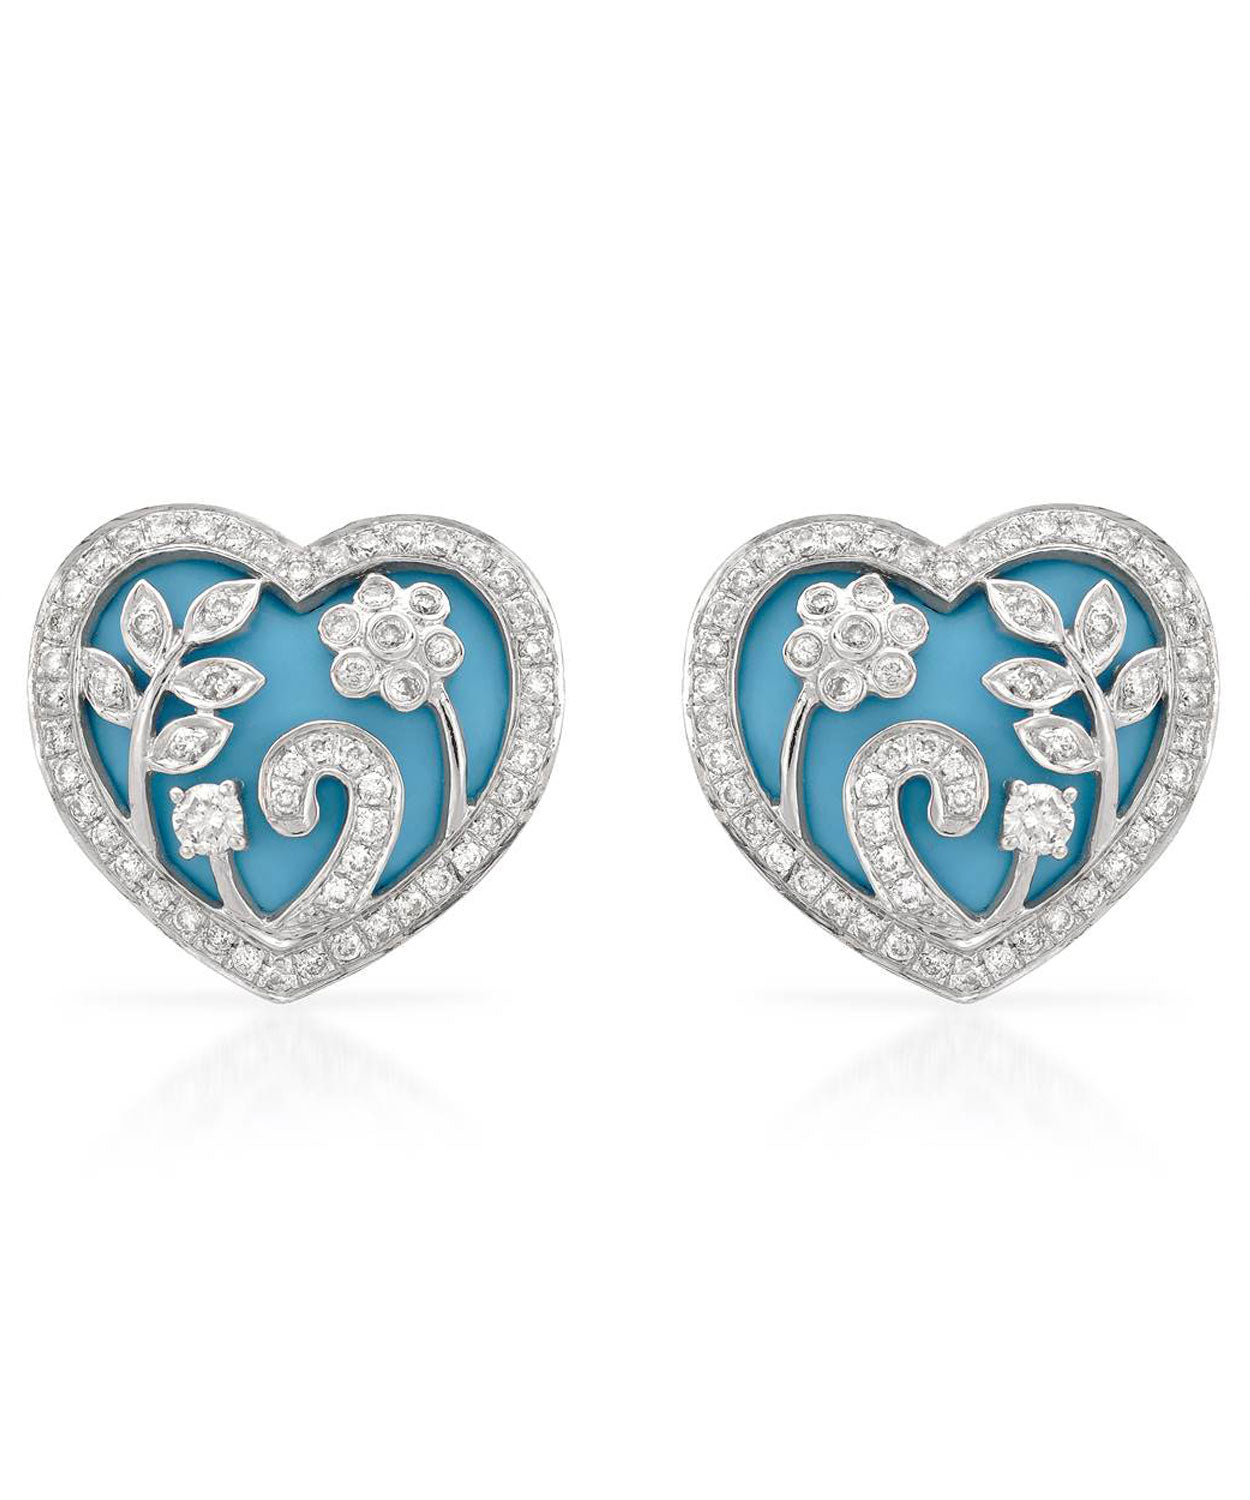 Patterns Of Love Collection 0.79 ctw Diamond and Turquoise 18k Gold Heart & Flowers Earrings View 1